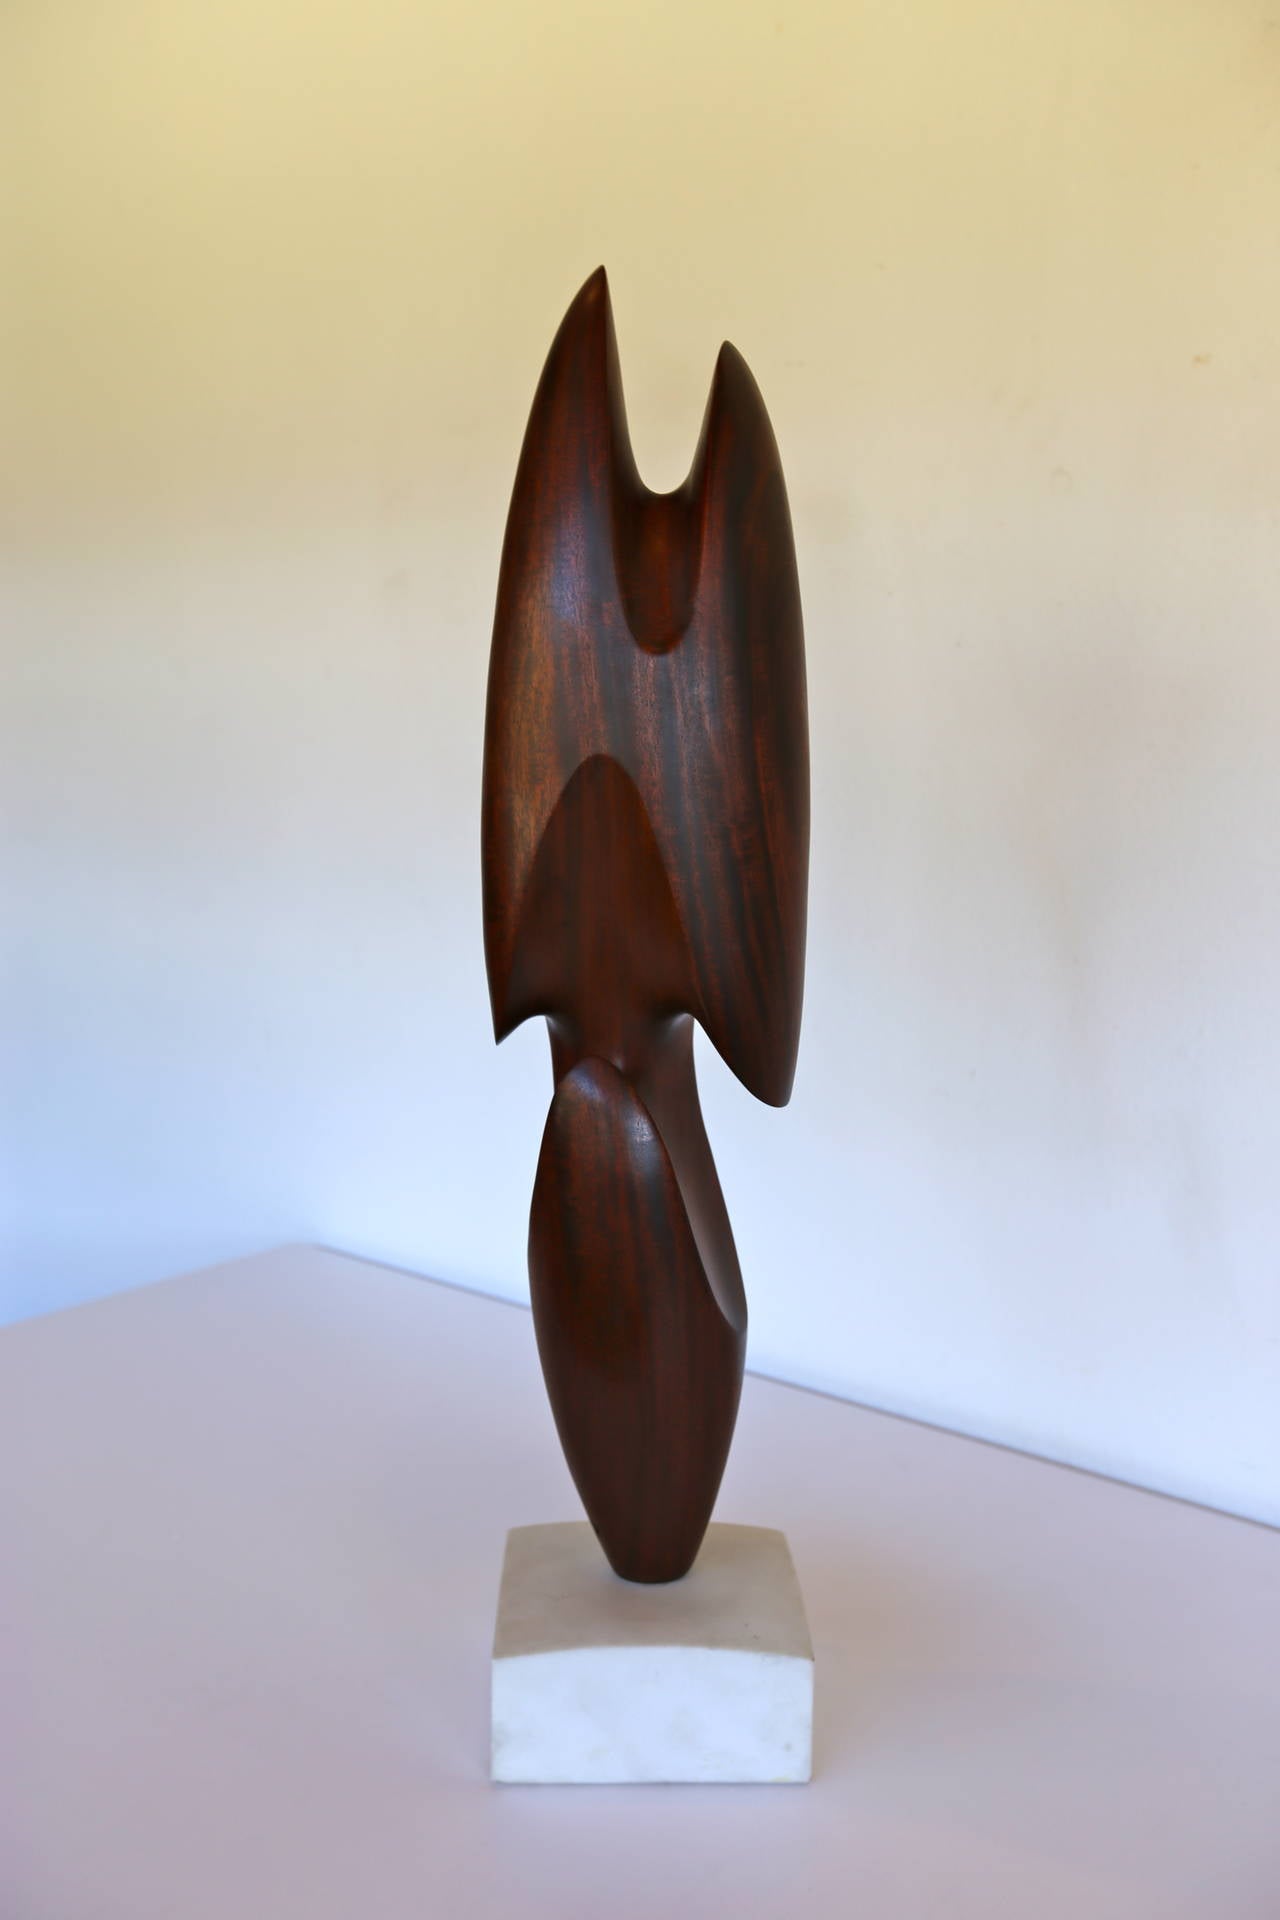 Organic abstract mahogany sculpture by sculptor Henry Moretti.